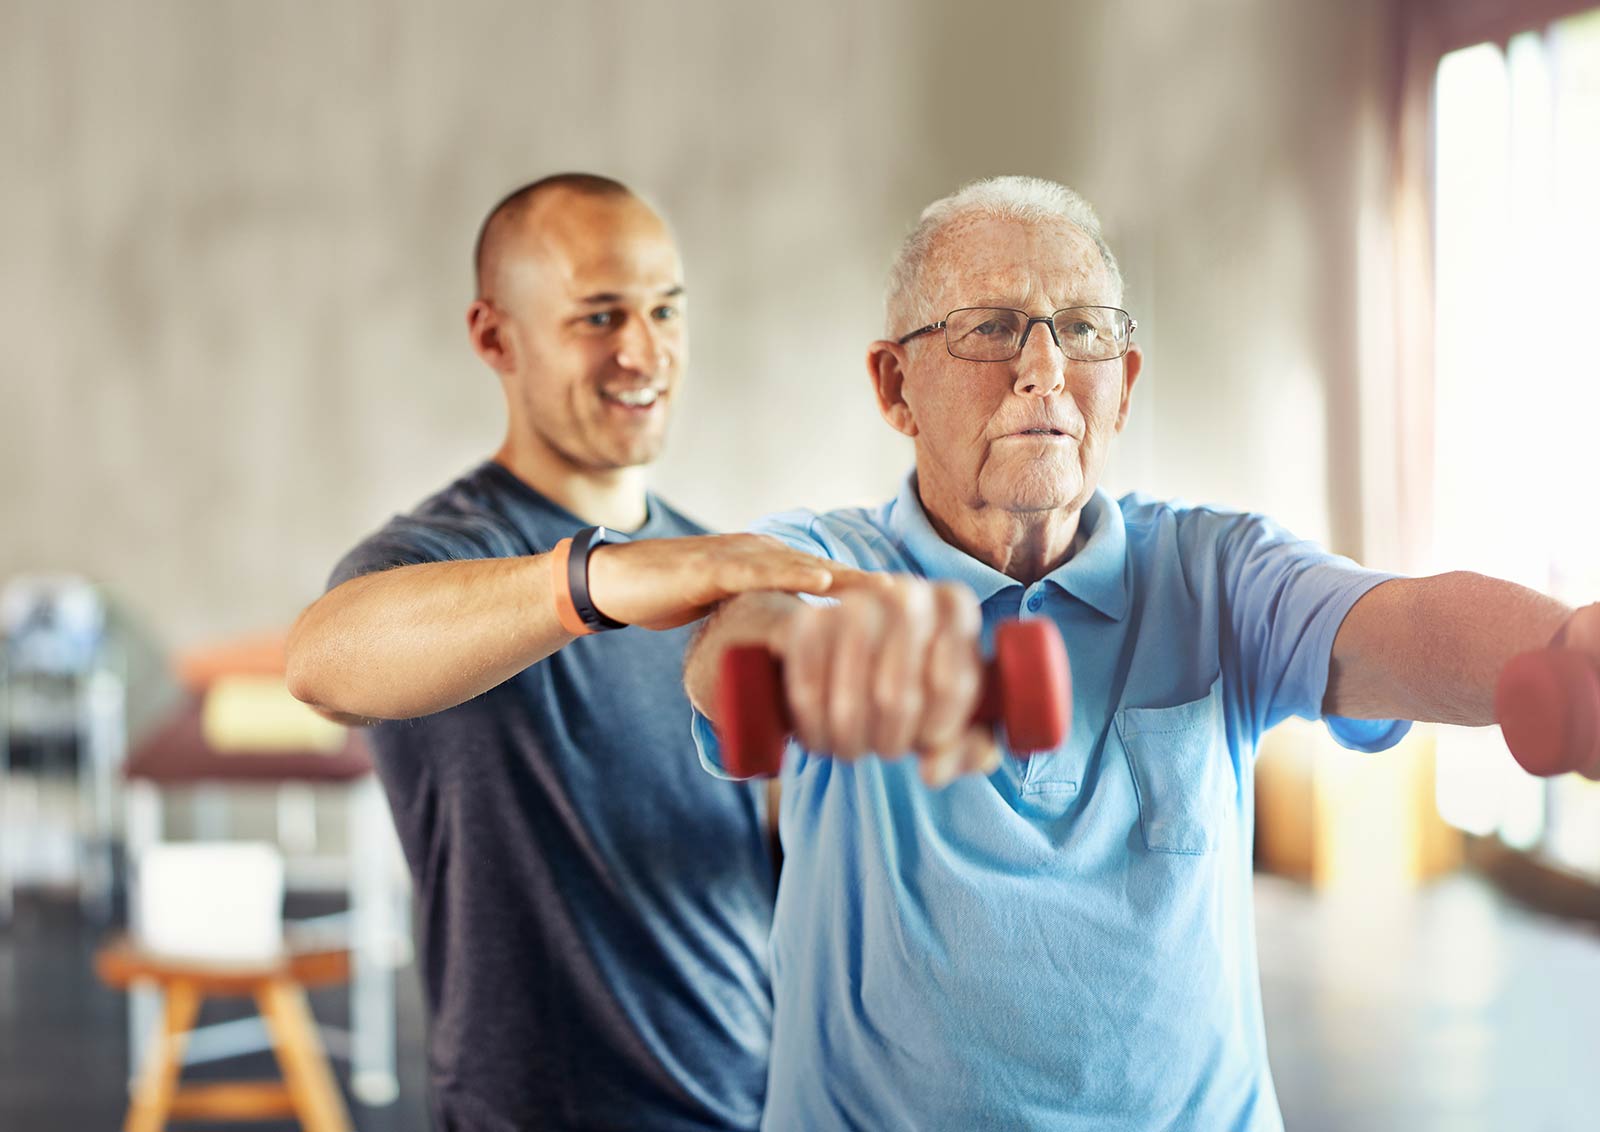 Senior man working with a physical therapist using dumbells